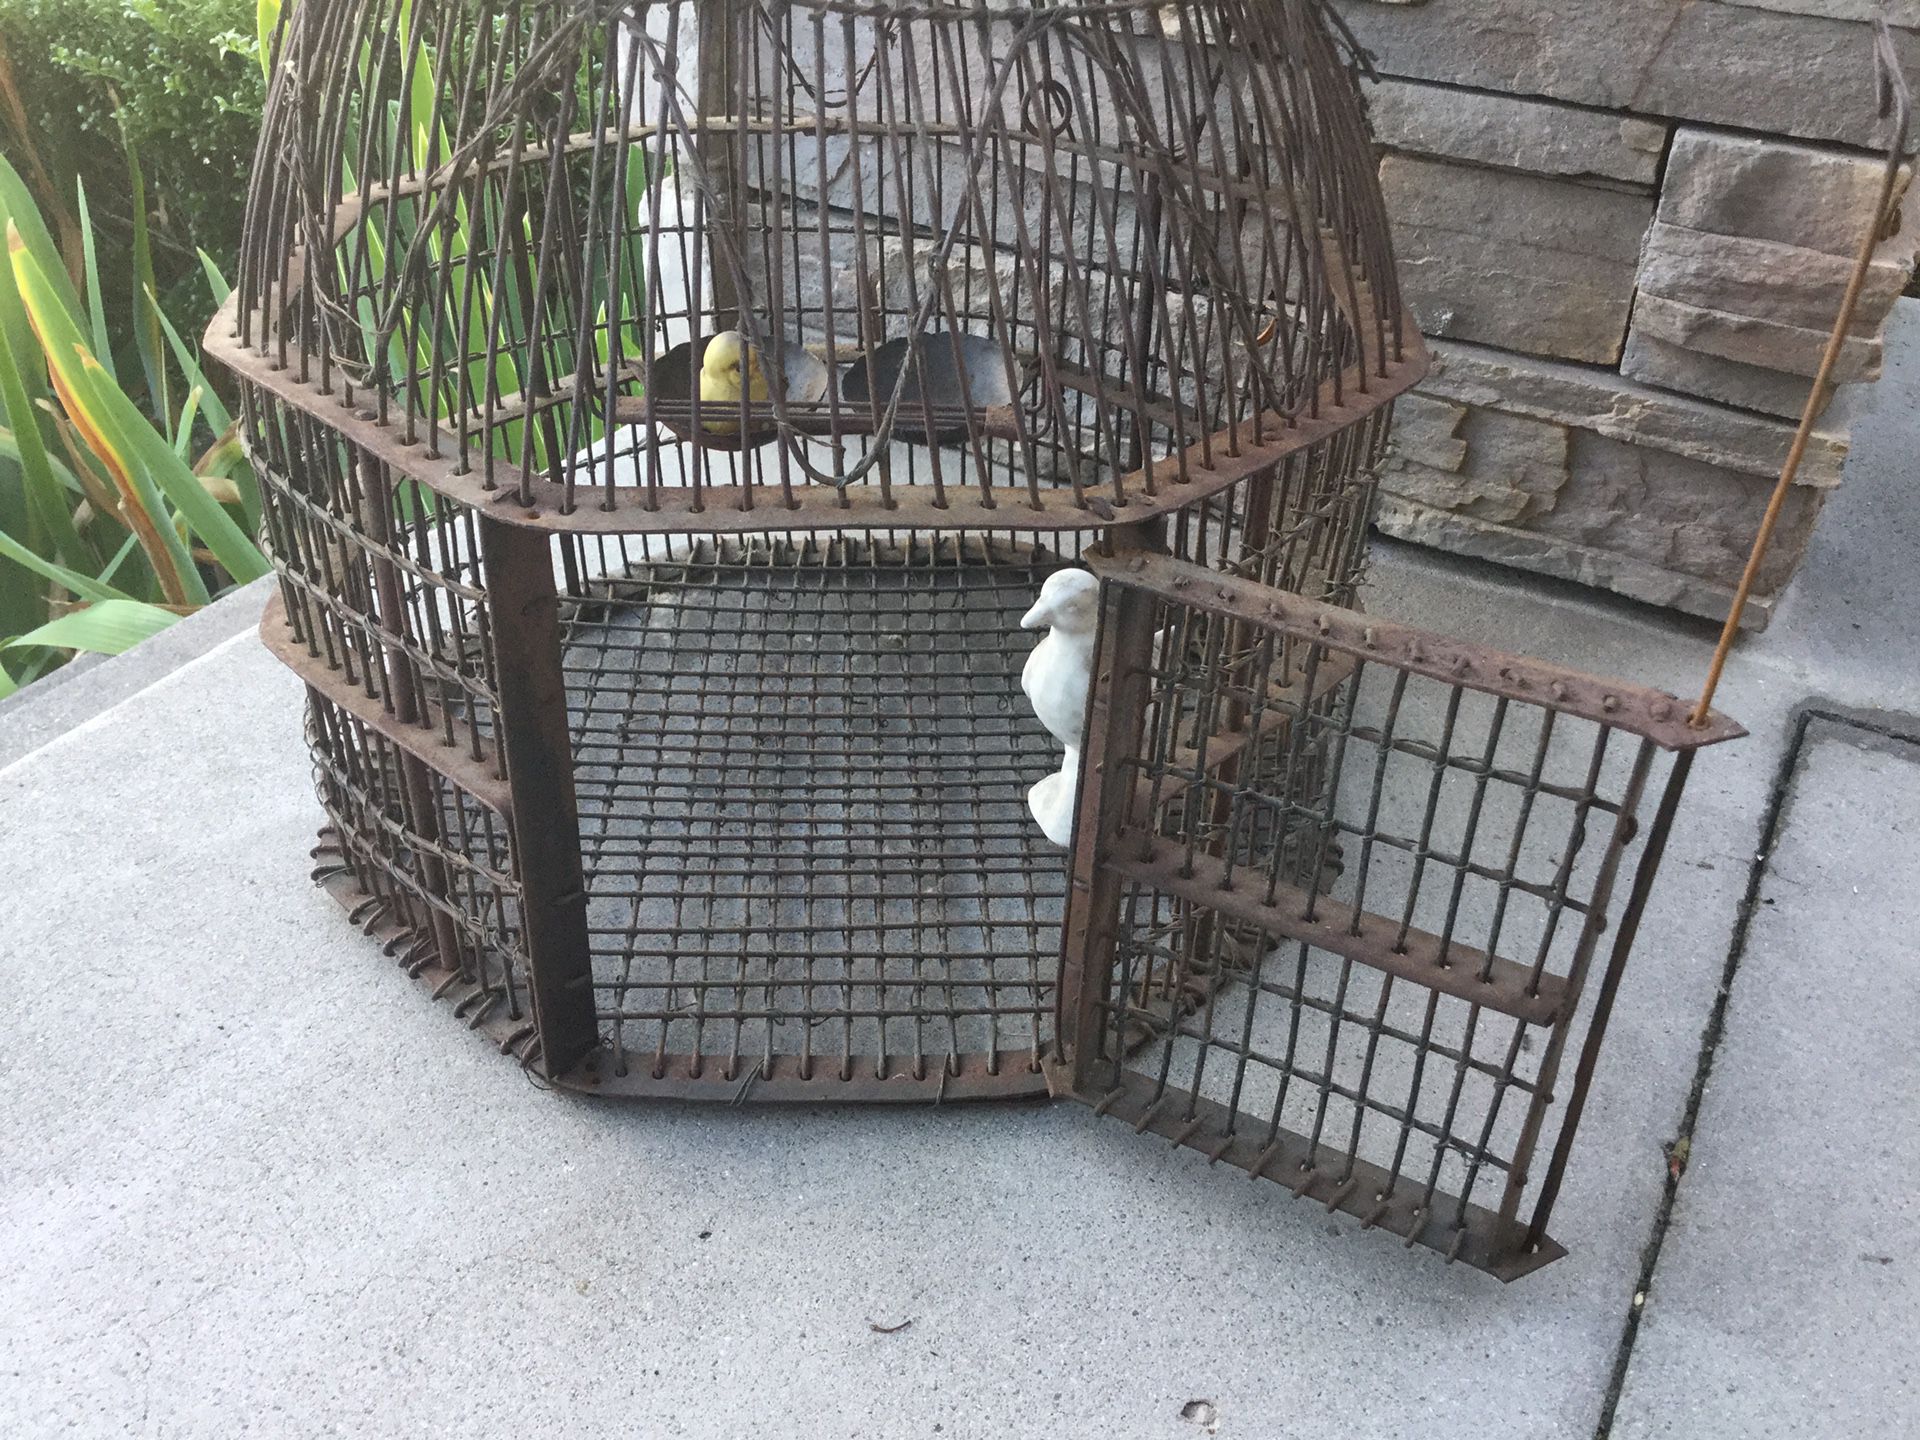 Unusual Vintage DOMED BIRD CAGE with Swing and Hook for Carrying or Hanging